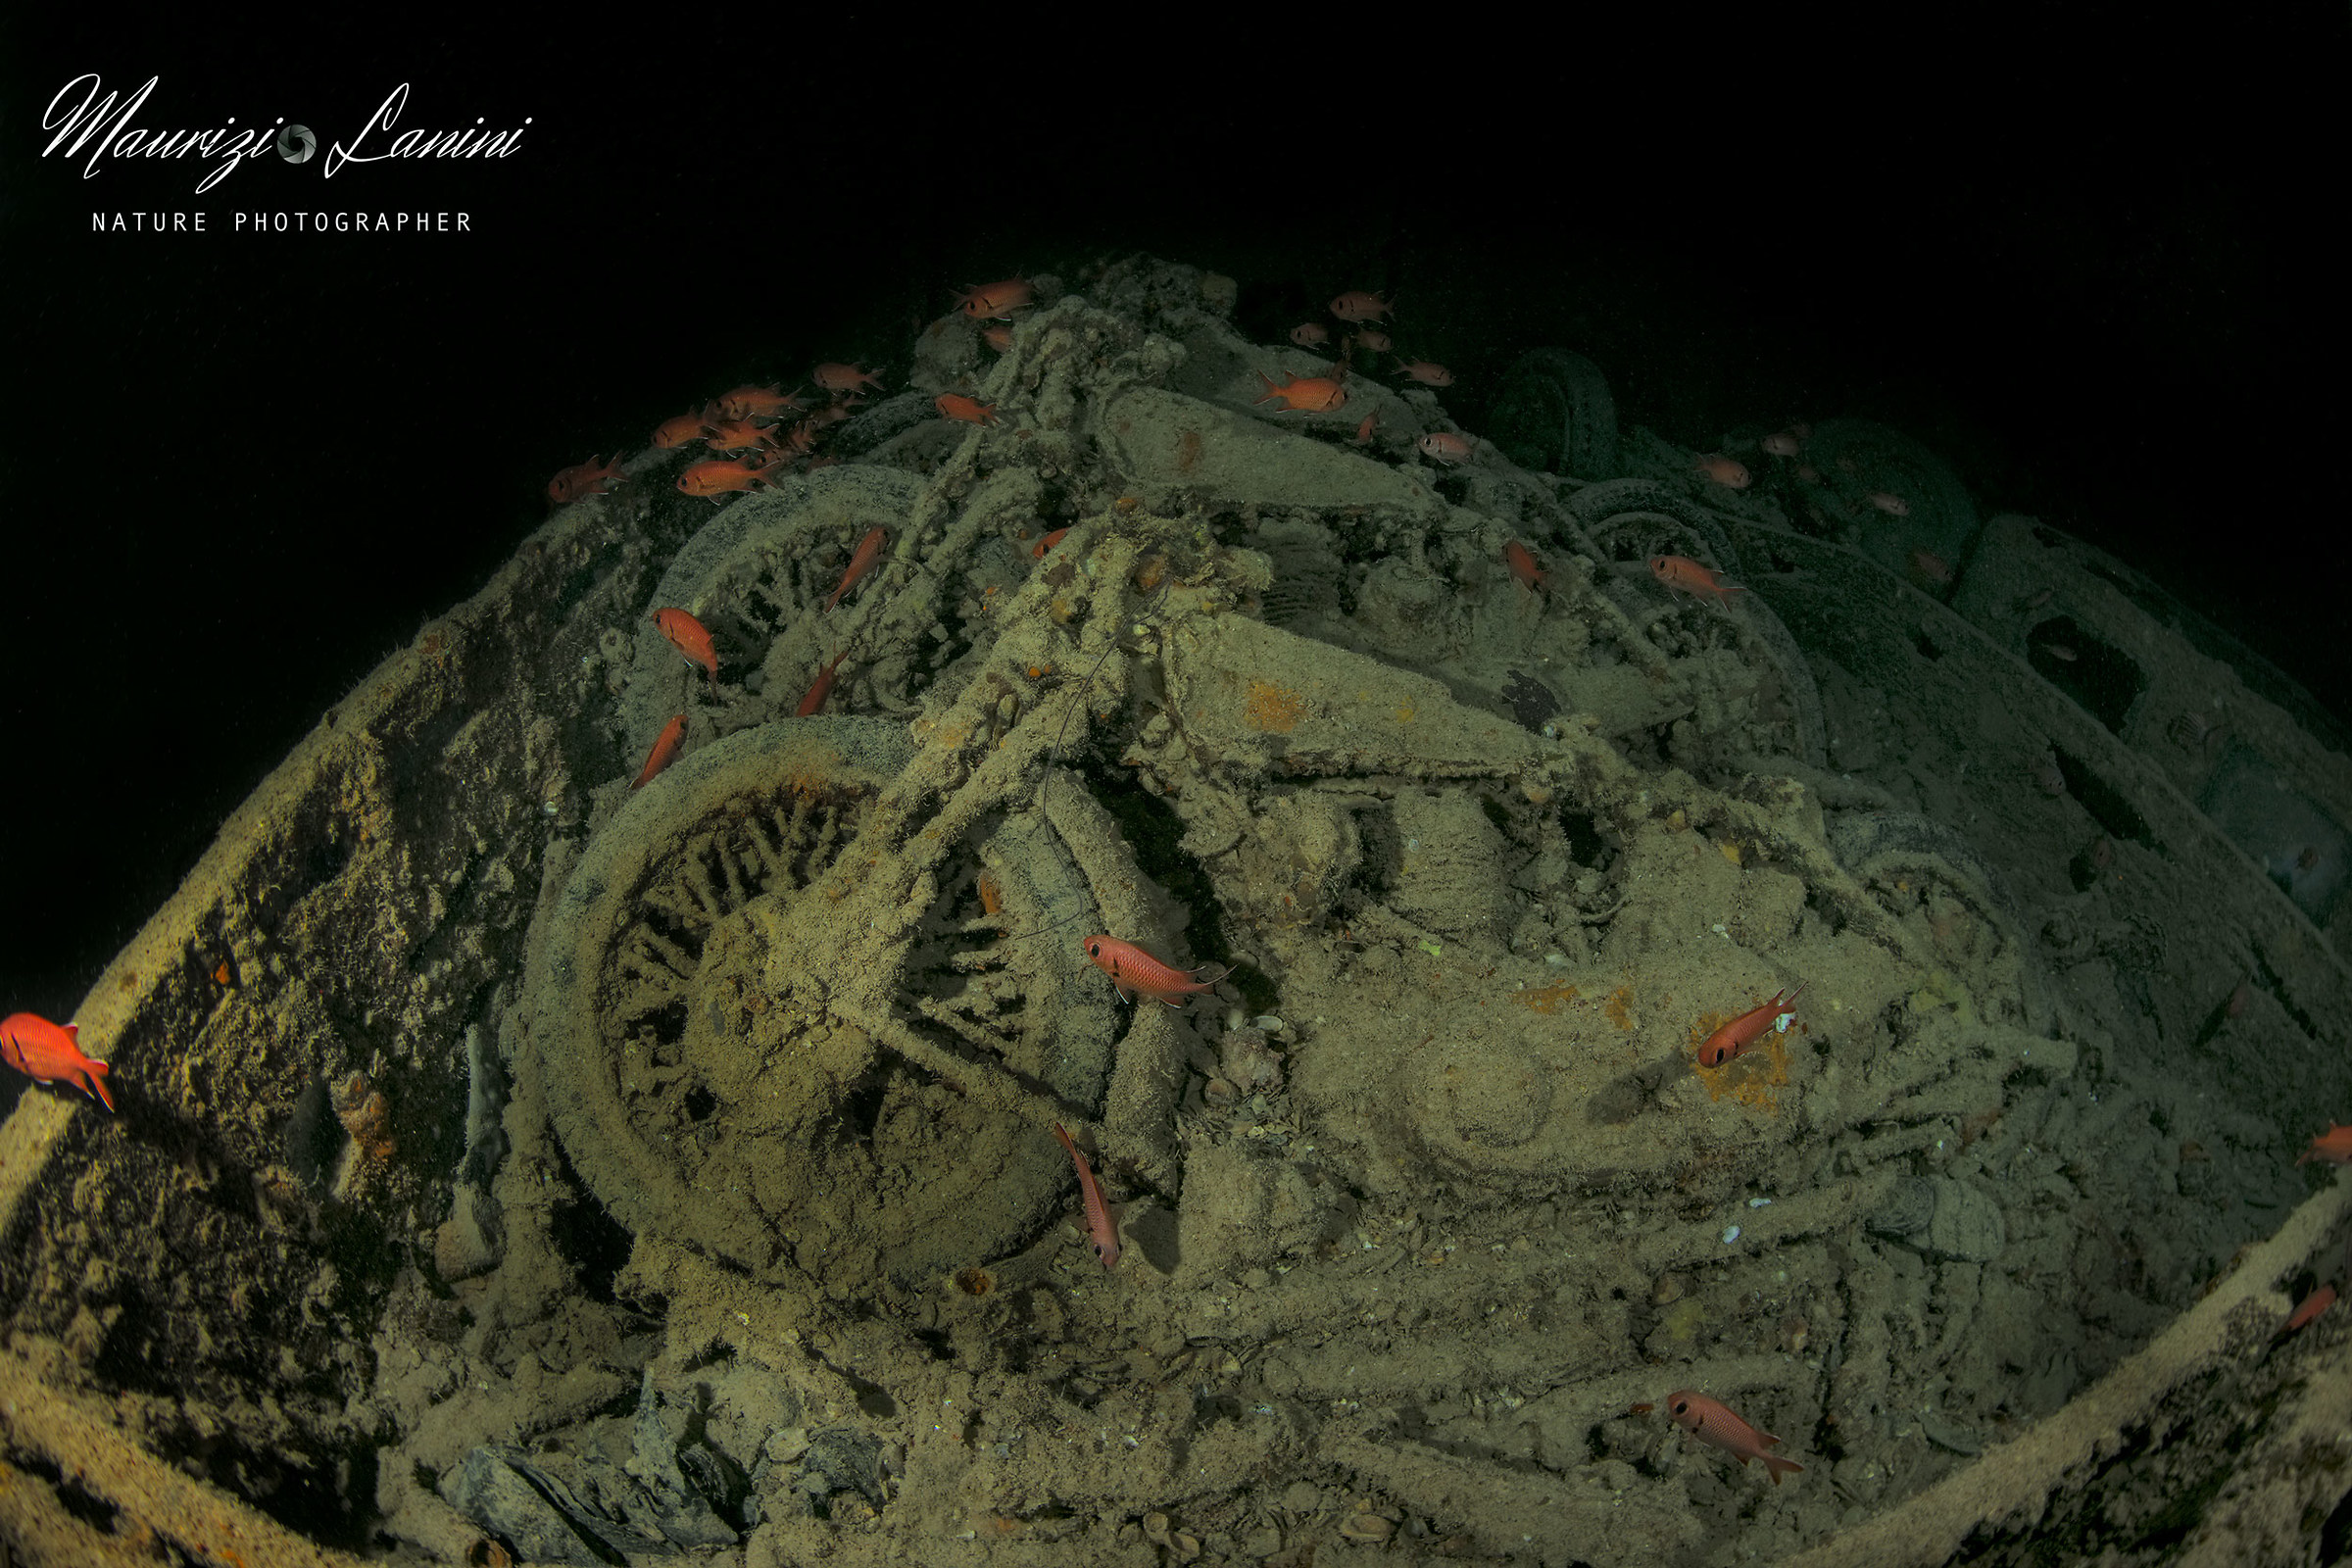 The holds of the Thistlegorm wreck...